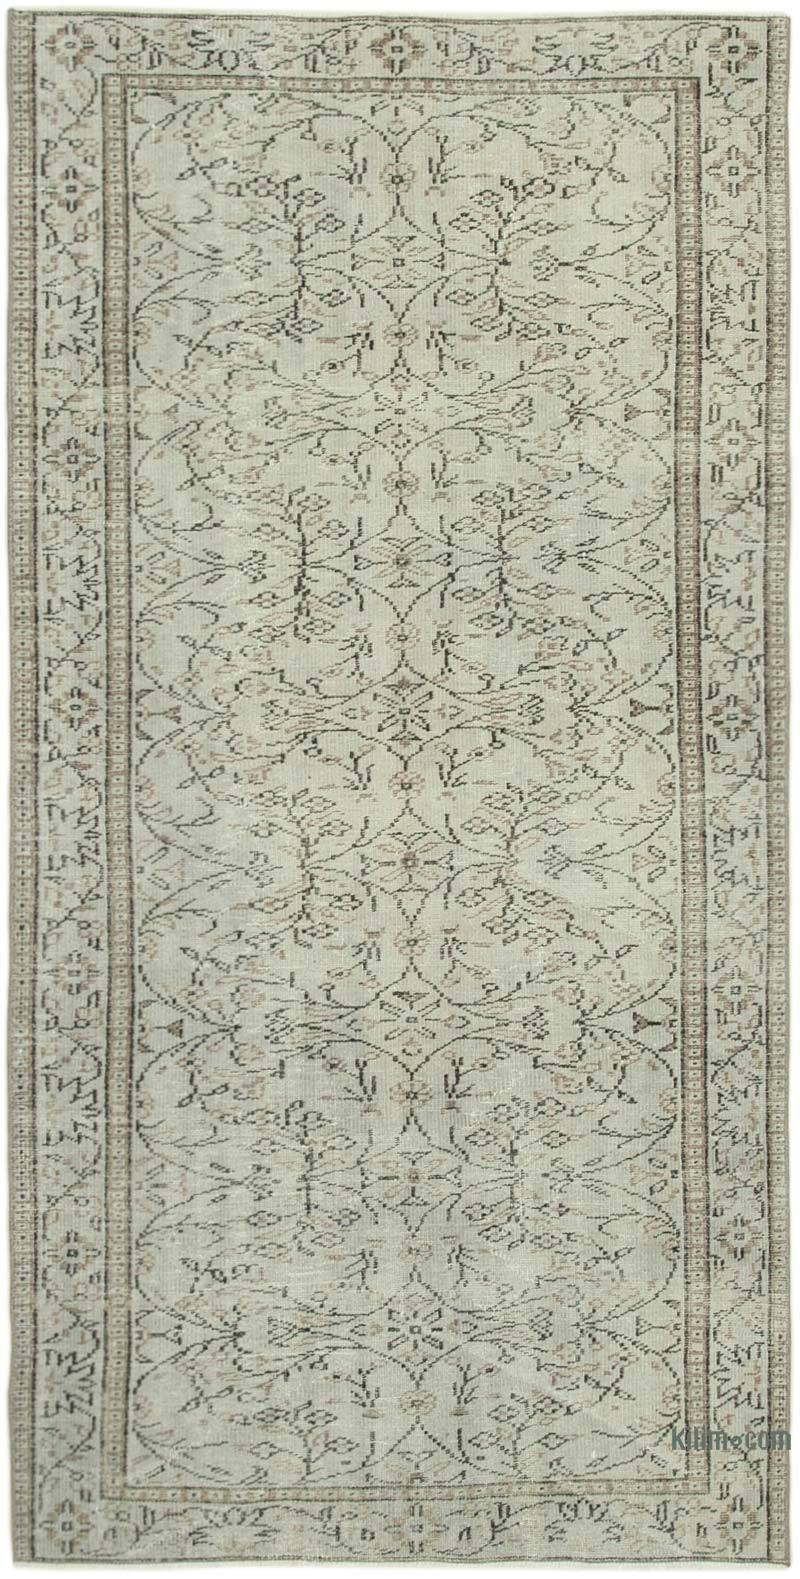 Grey Over-dyed Vintage Hand-Knotted Turkish Rug - 4' 6" x 8' 8" (54" x 104") - K0056168